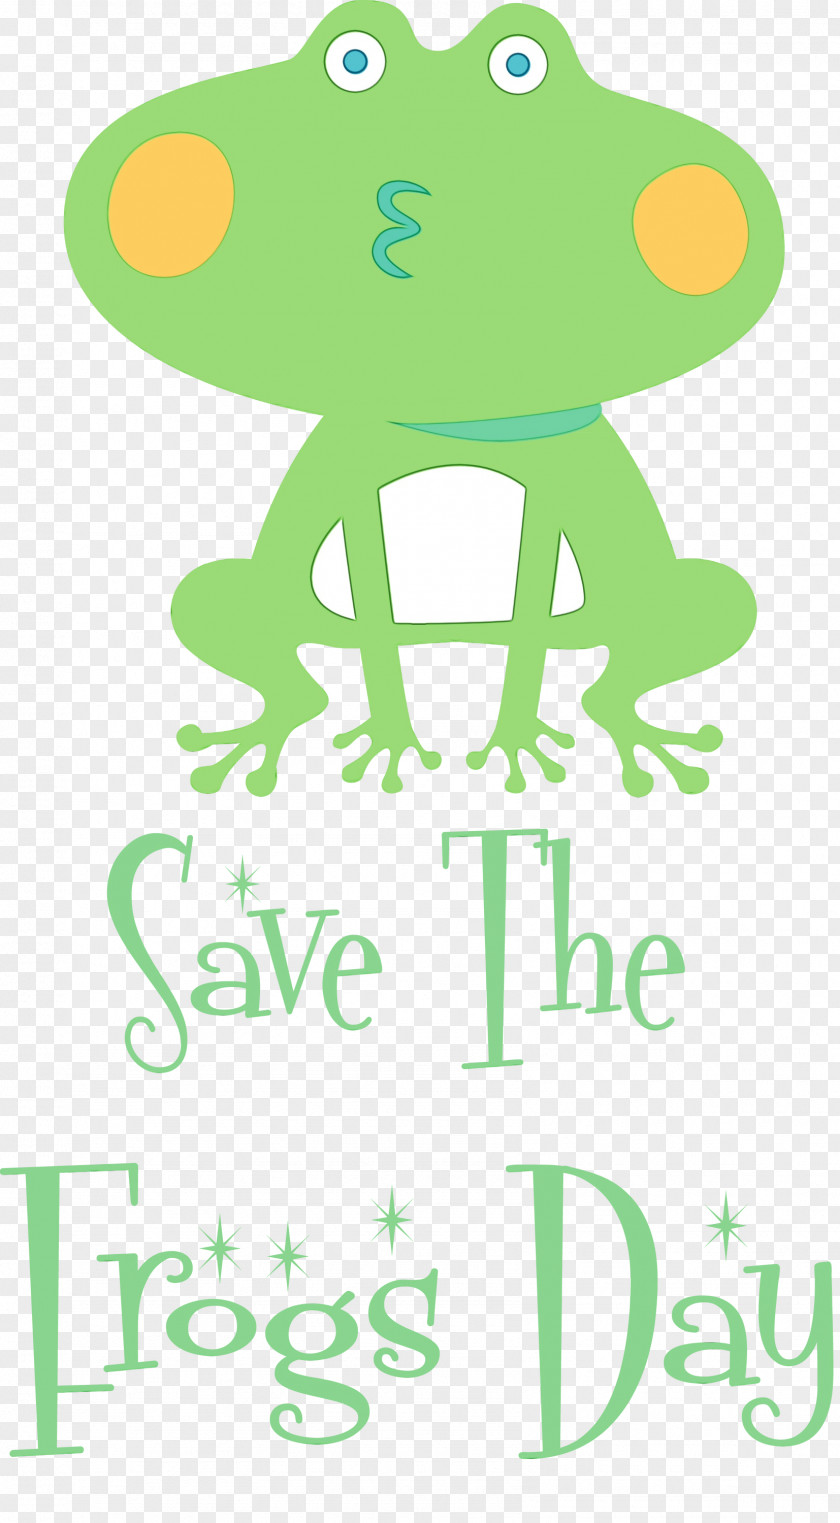 Frogs Logo Tree Frog Cartoon Wall Decal PNG